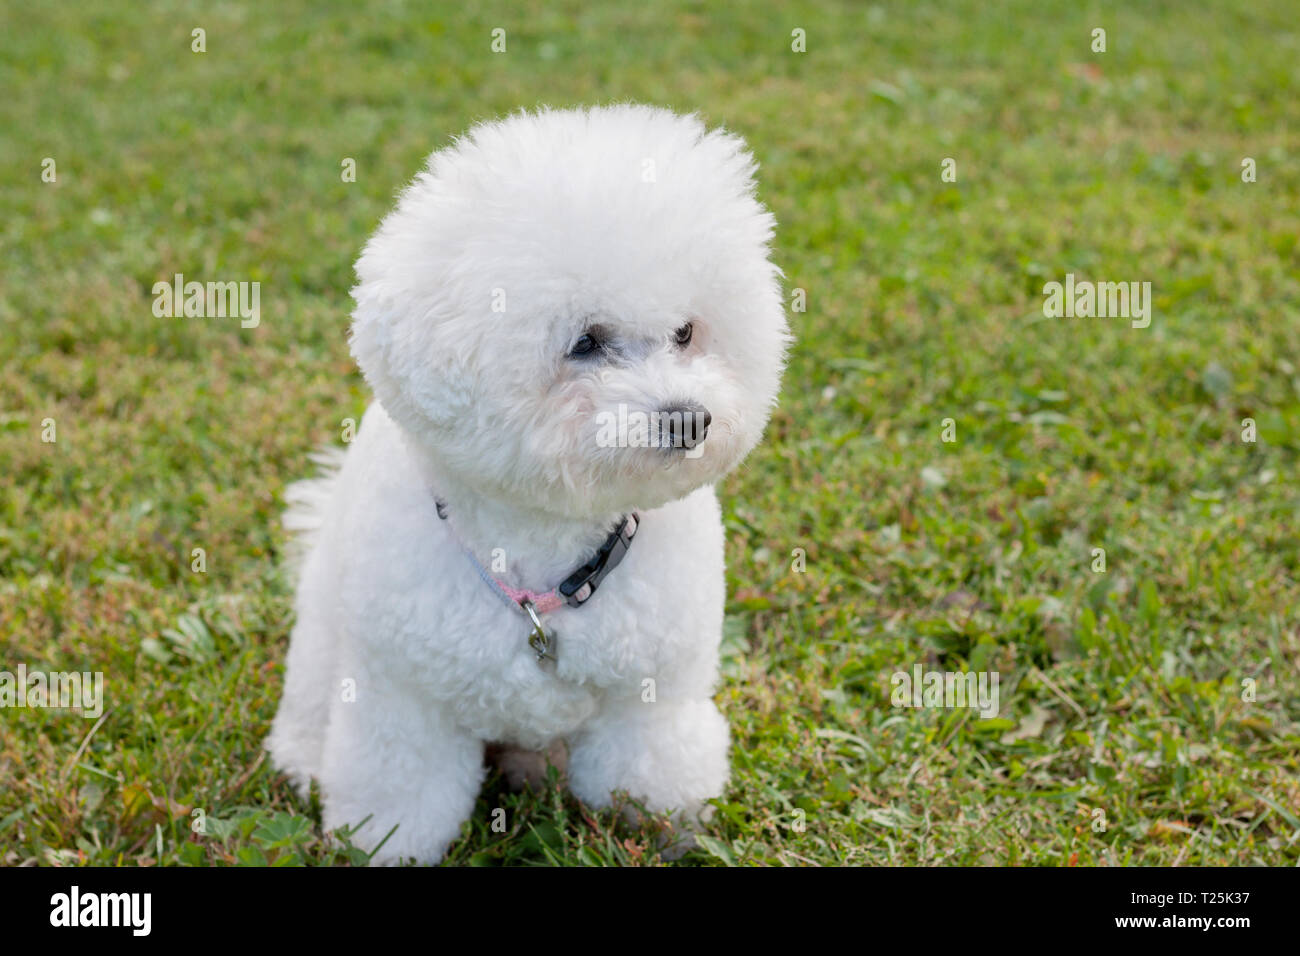 Cute bichon frise is sitting on a spring meadow. Purebred dog. Pet animals. Stock Photo